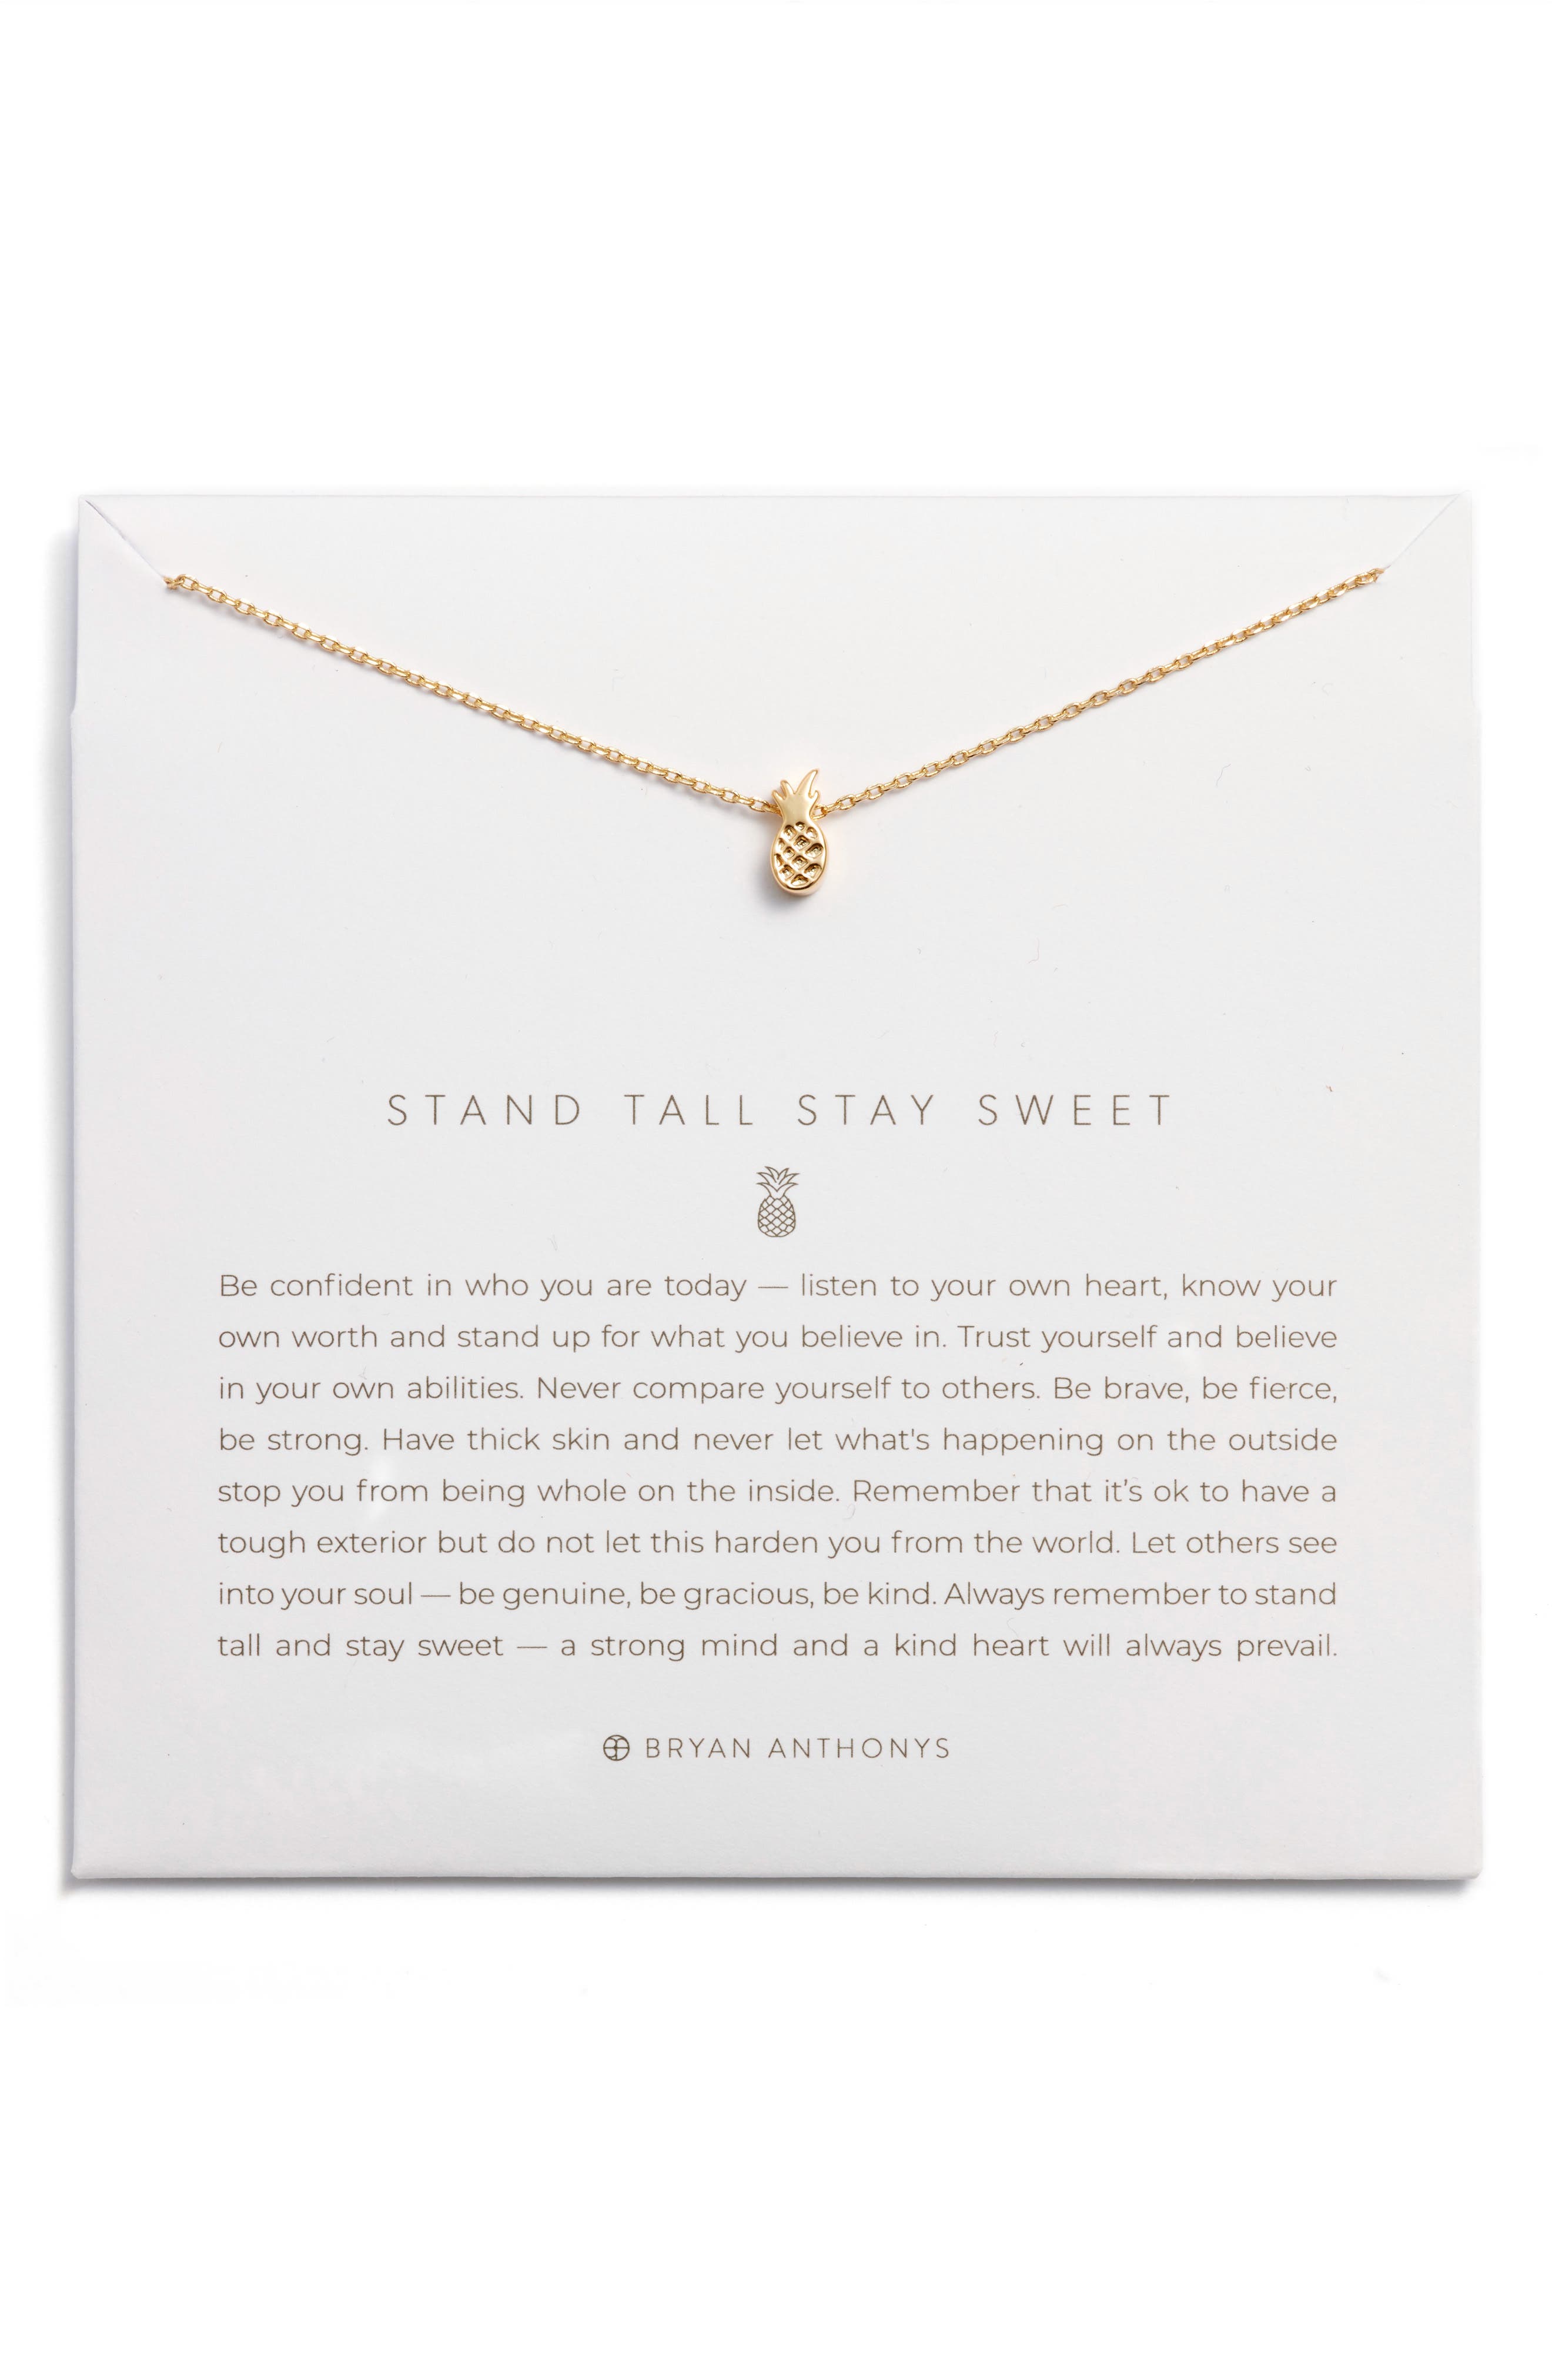 Bryan Anthonys Stand Tall Stay Sweet Pineapple Pendant Necklace in Gold at Nordstrom